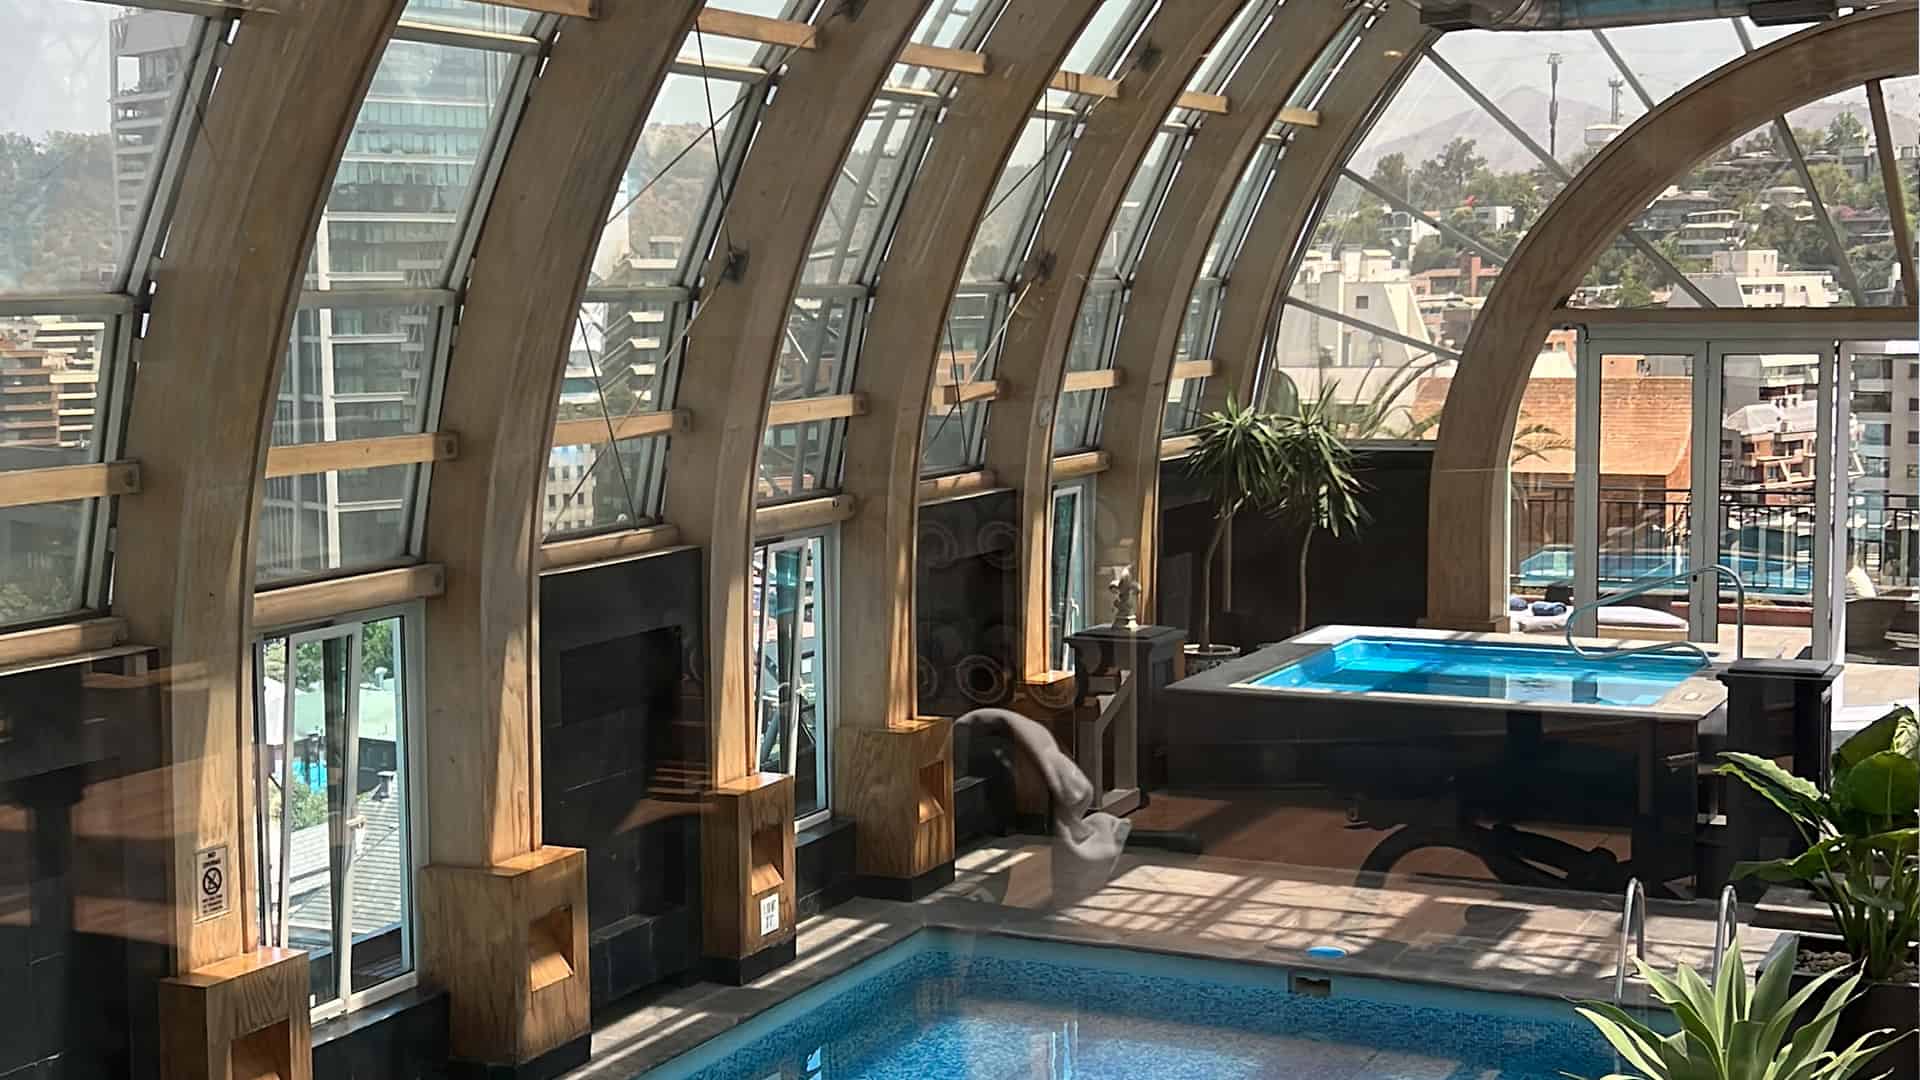 Rooftop pool and hot tub with arched glass ceiling